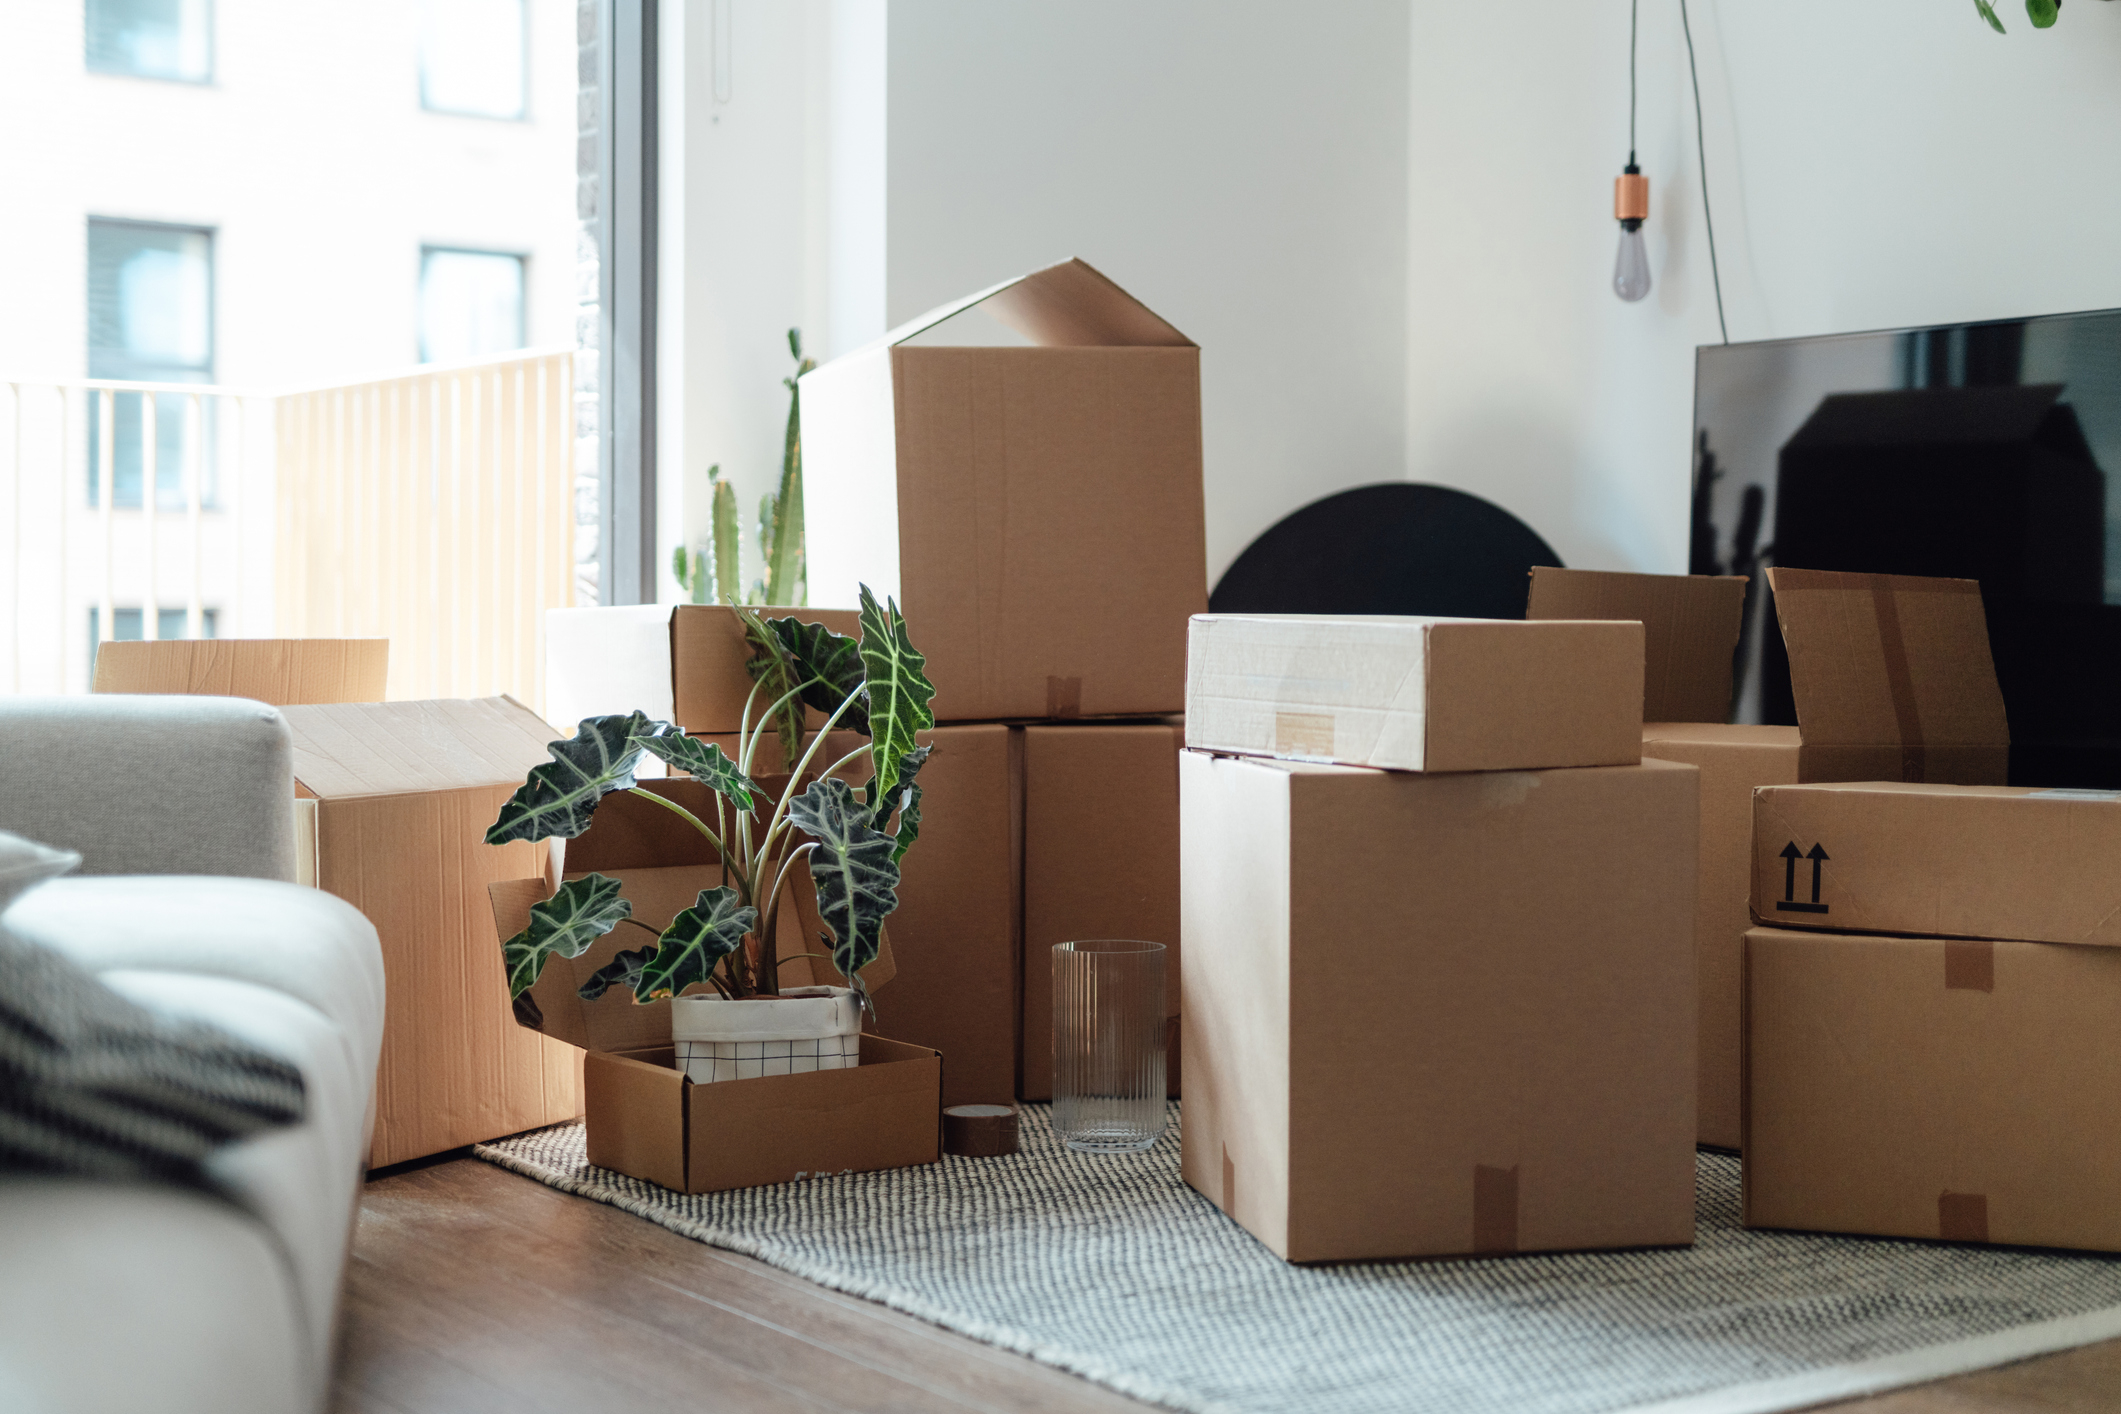 Living room with unpacked boxes, suggesting a recent move. A plant is visible among the boxes